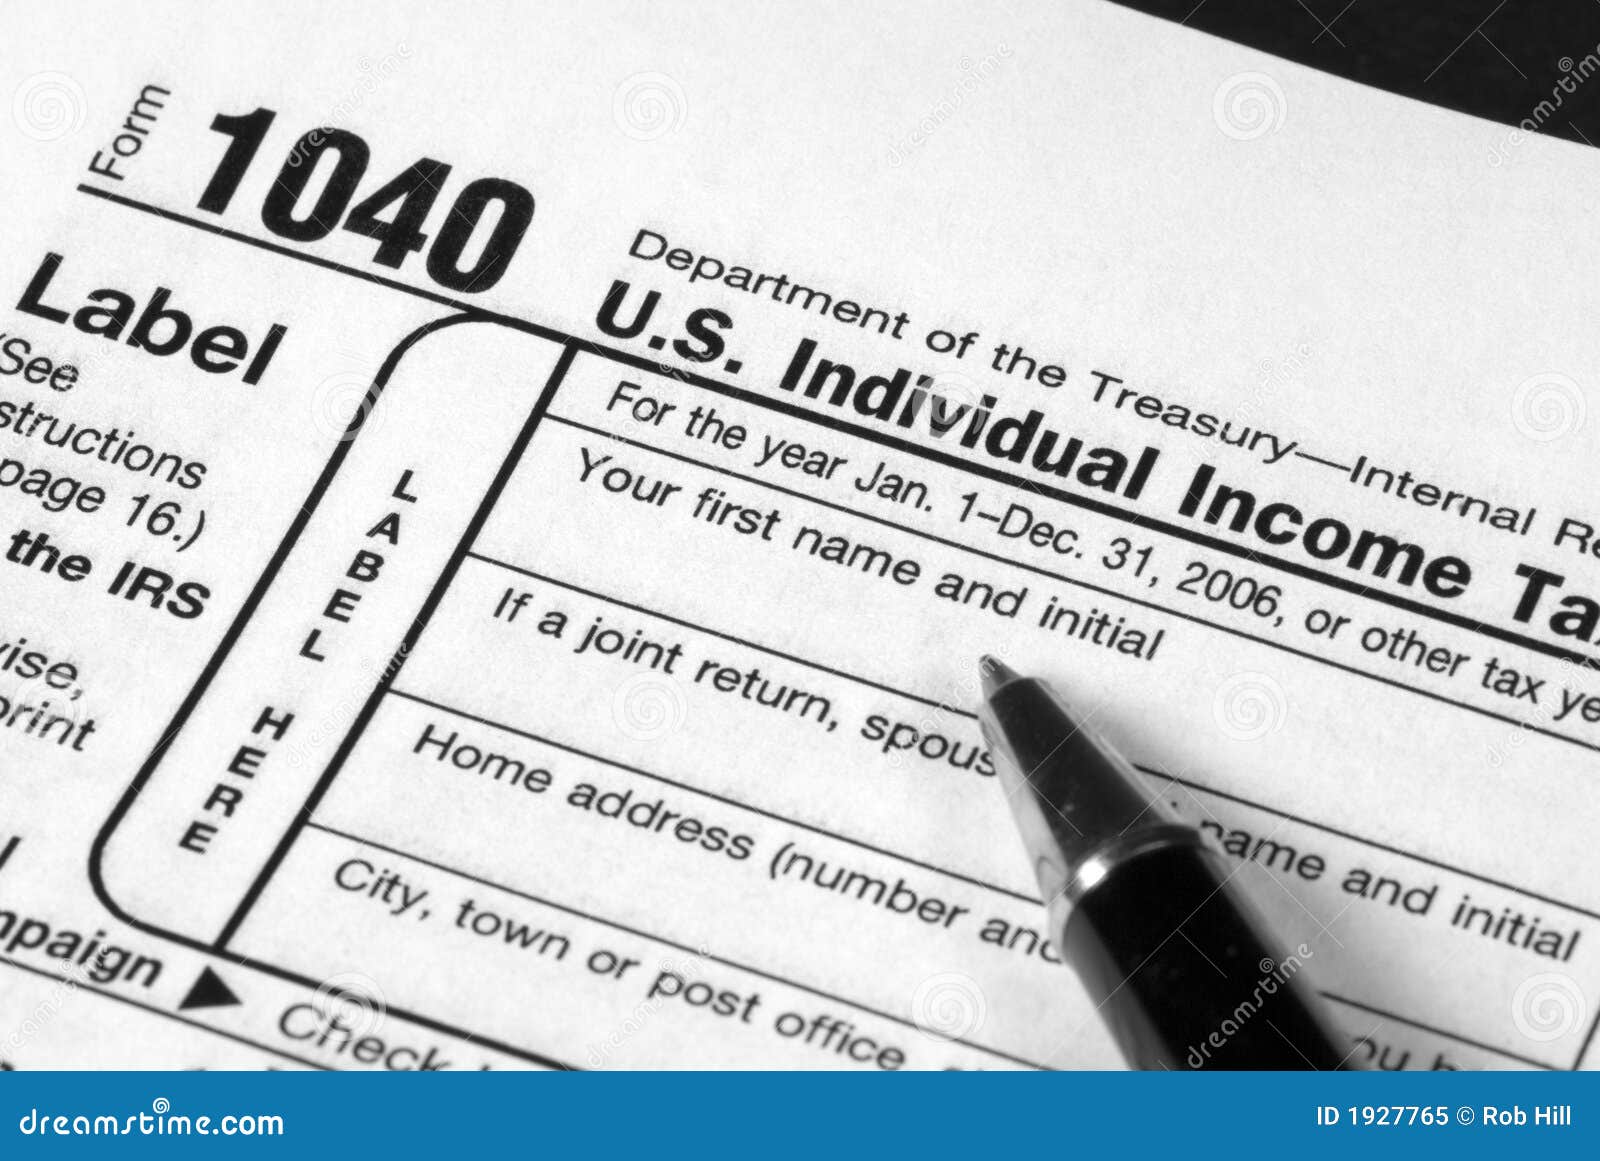 Tax Form stock image. Image of deadline, taxes